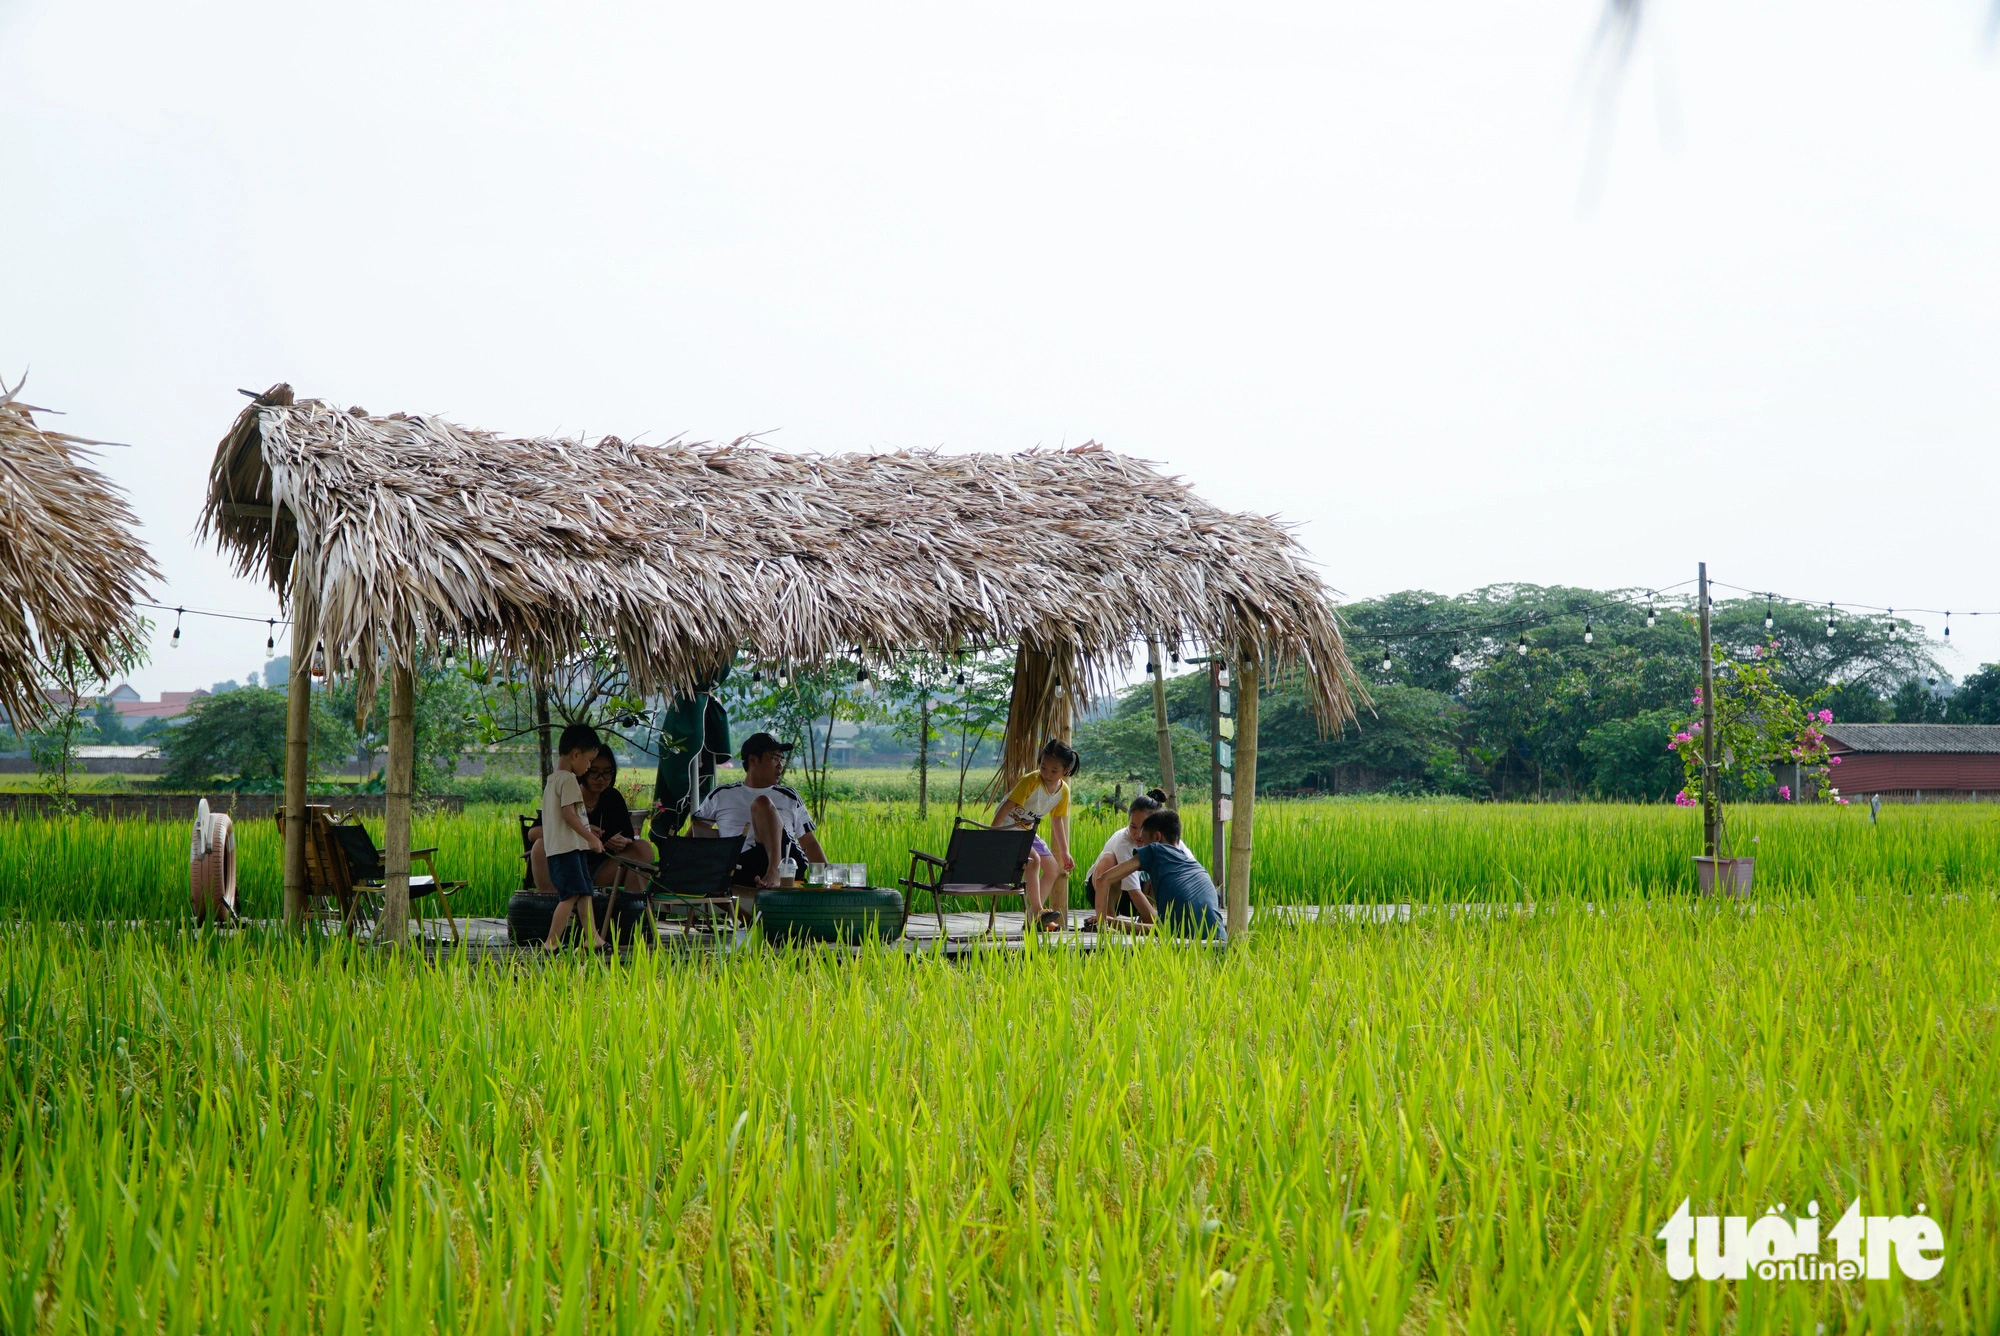 Rustic café amidst rice fields draws visitors to Hanoi outskirts